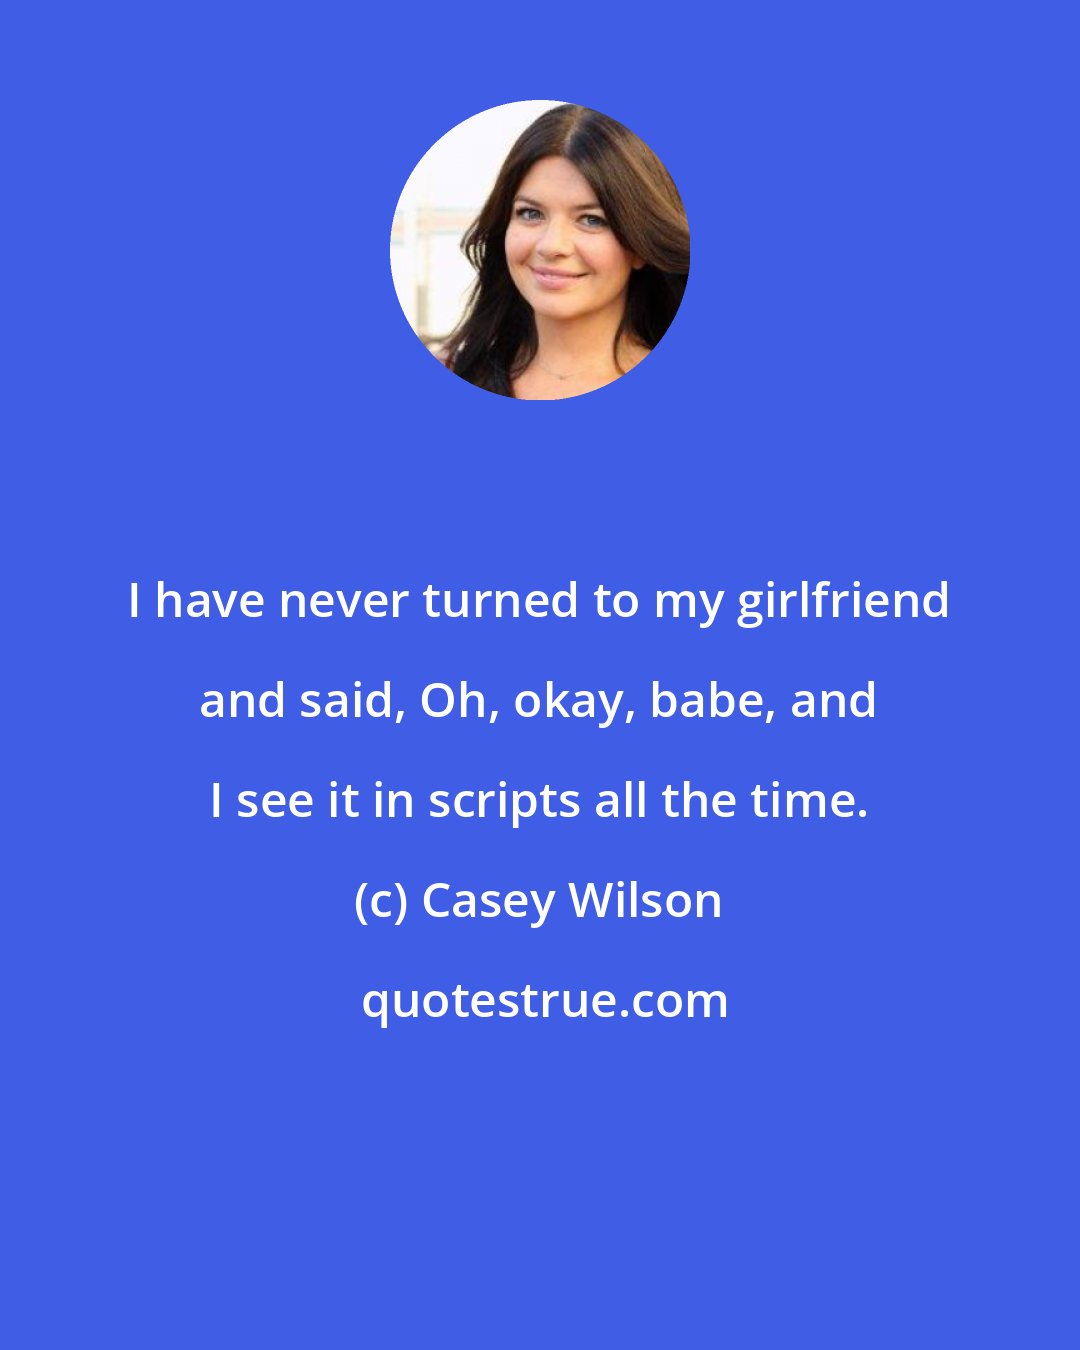 Casey Wilson: I have never turned to my girlfriend and said, Oh, okay, babe, and I see it in scripts all the time.